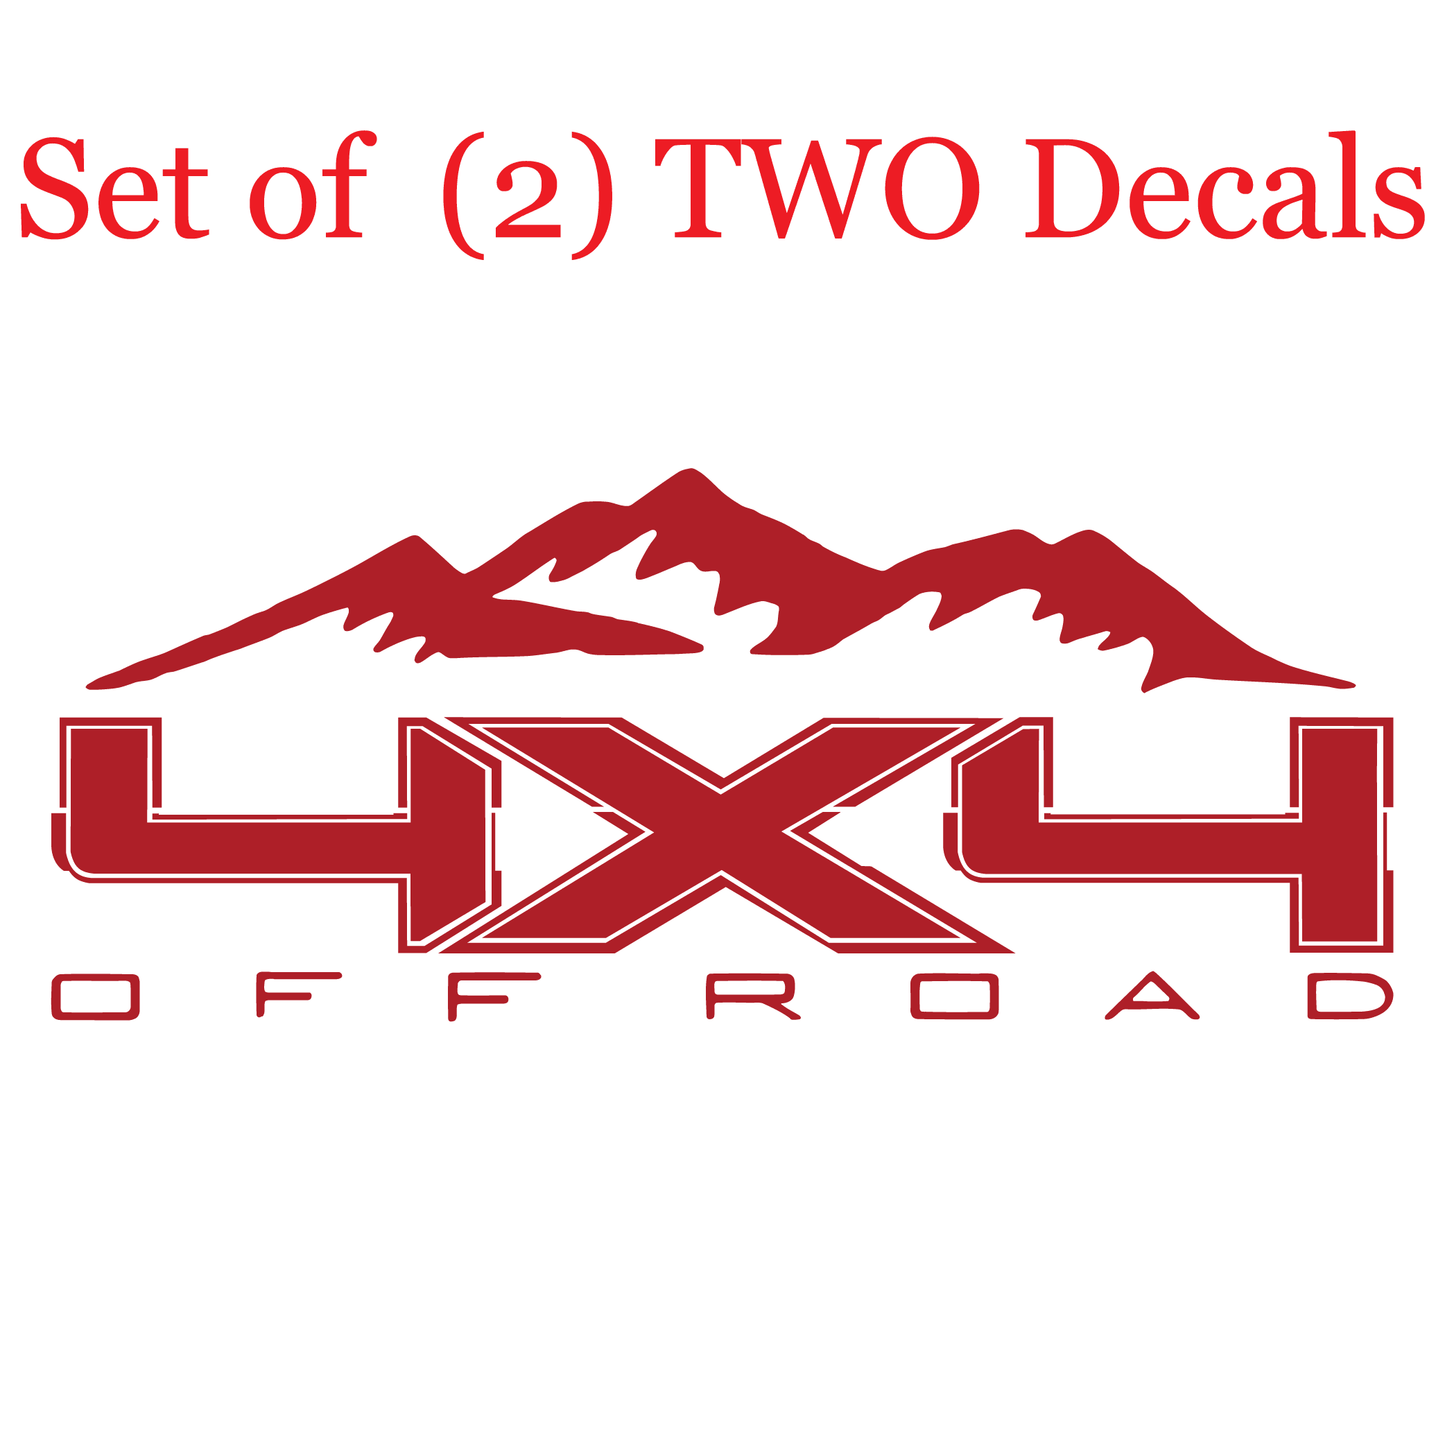 Shop Vinyl Design F-150 F-250 Trucks Replacement Bedside Decals Mountain 4 x 4 Off Road #09 Vehicle decal 001 Red Gloss Shop Vinyl Design decals stickers